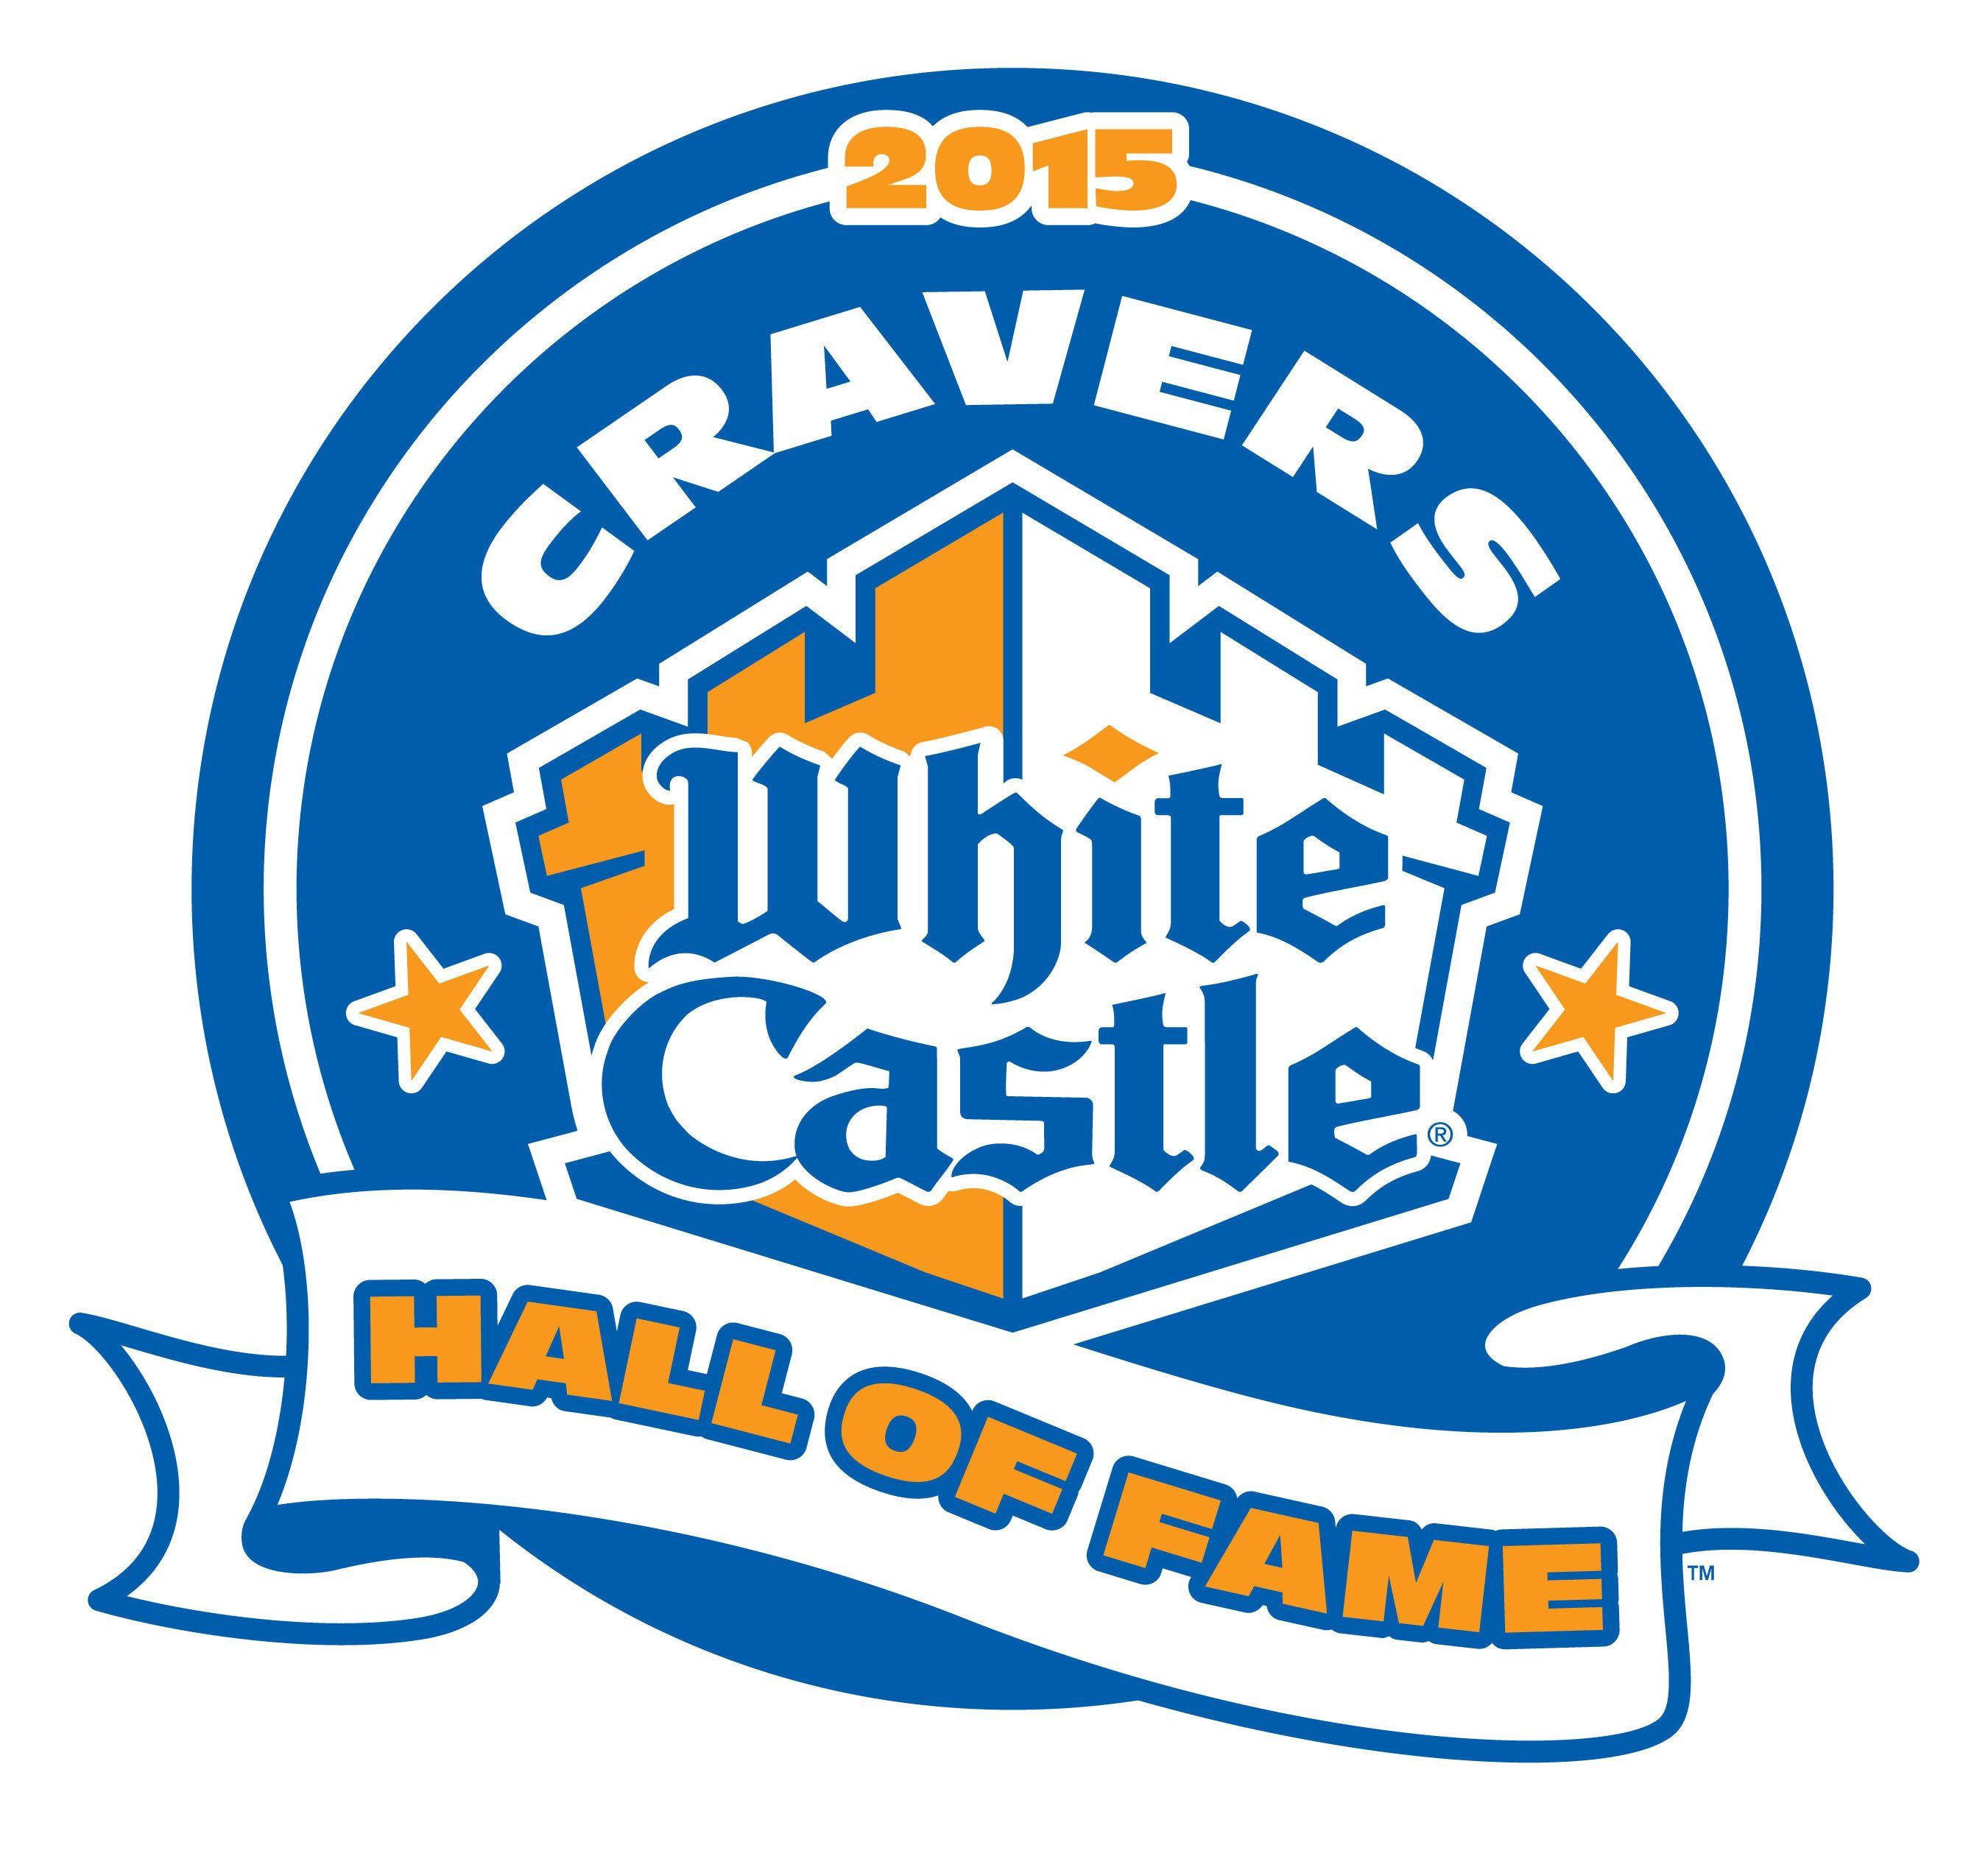 White Castle Logo - A Circus Performer, Boy Scout And Traveling Slider-Man Walk Into A ...